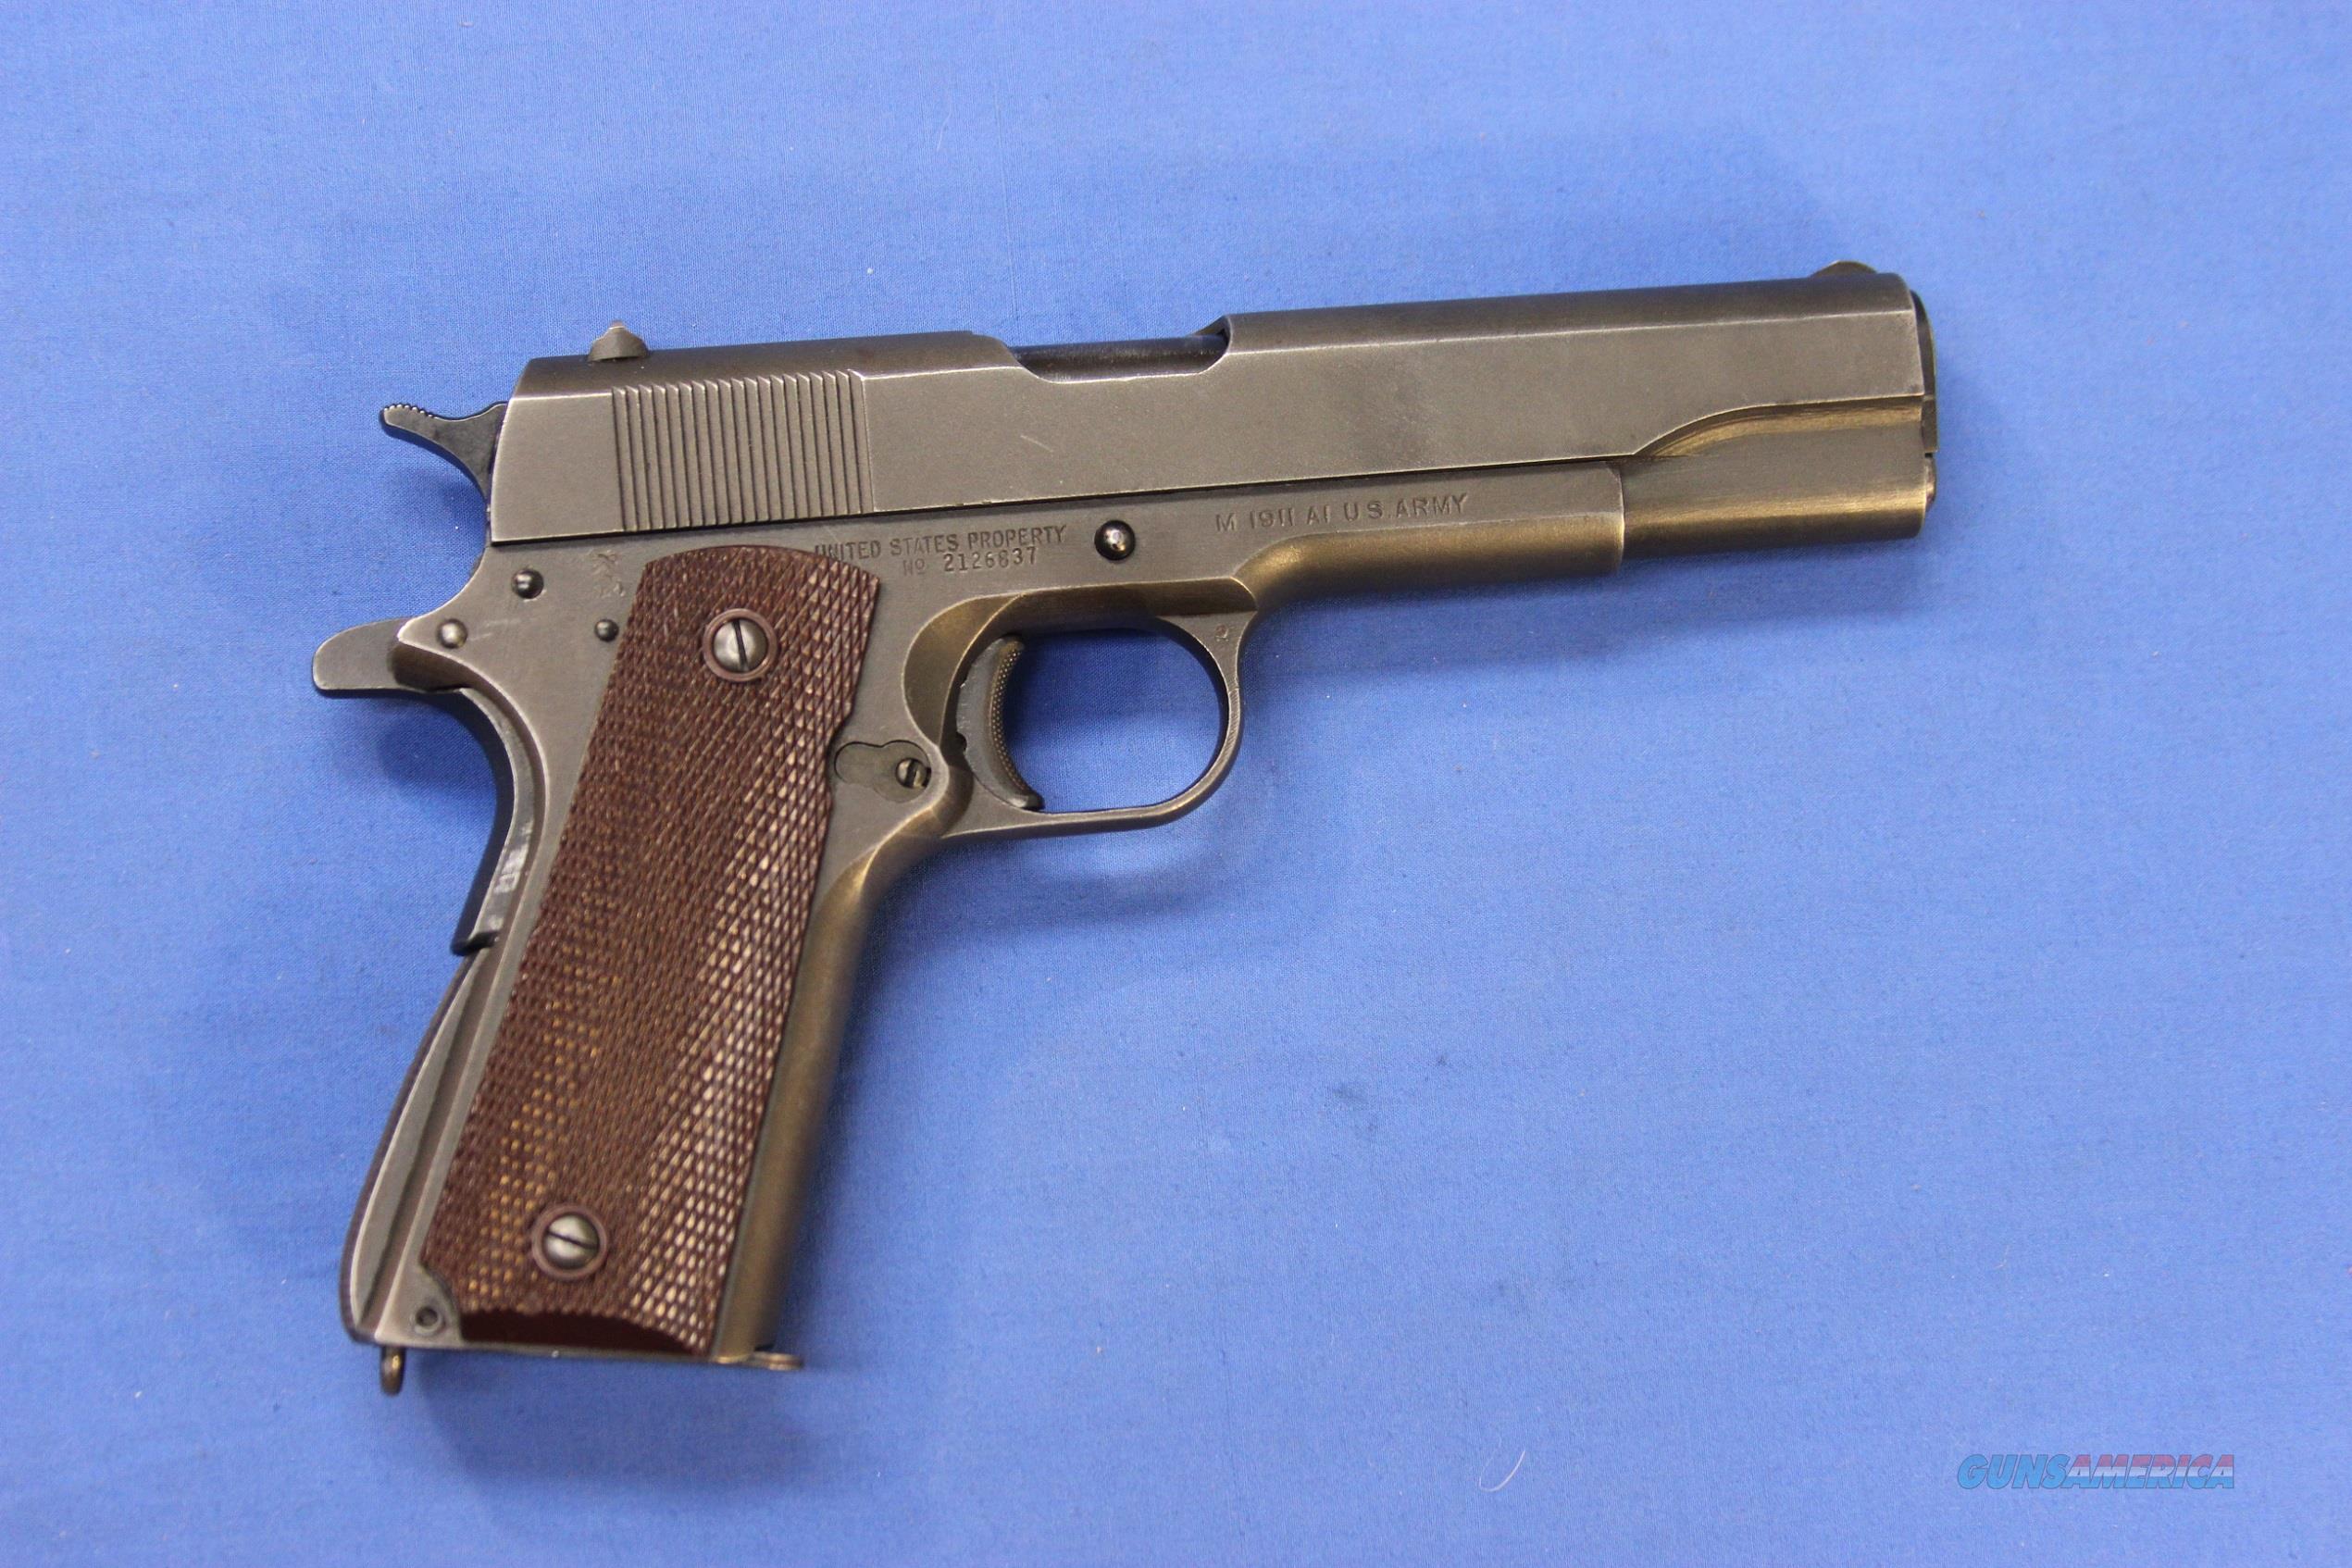 Ithaca Gun Co 1911 A1 Us Army 45 For Sale At 955483638 1457